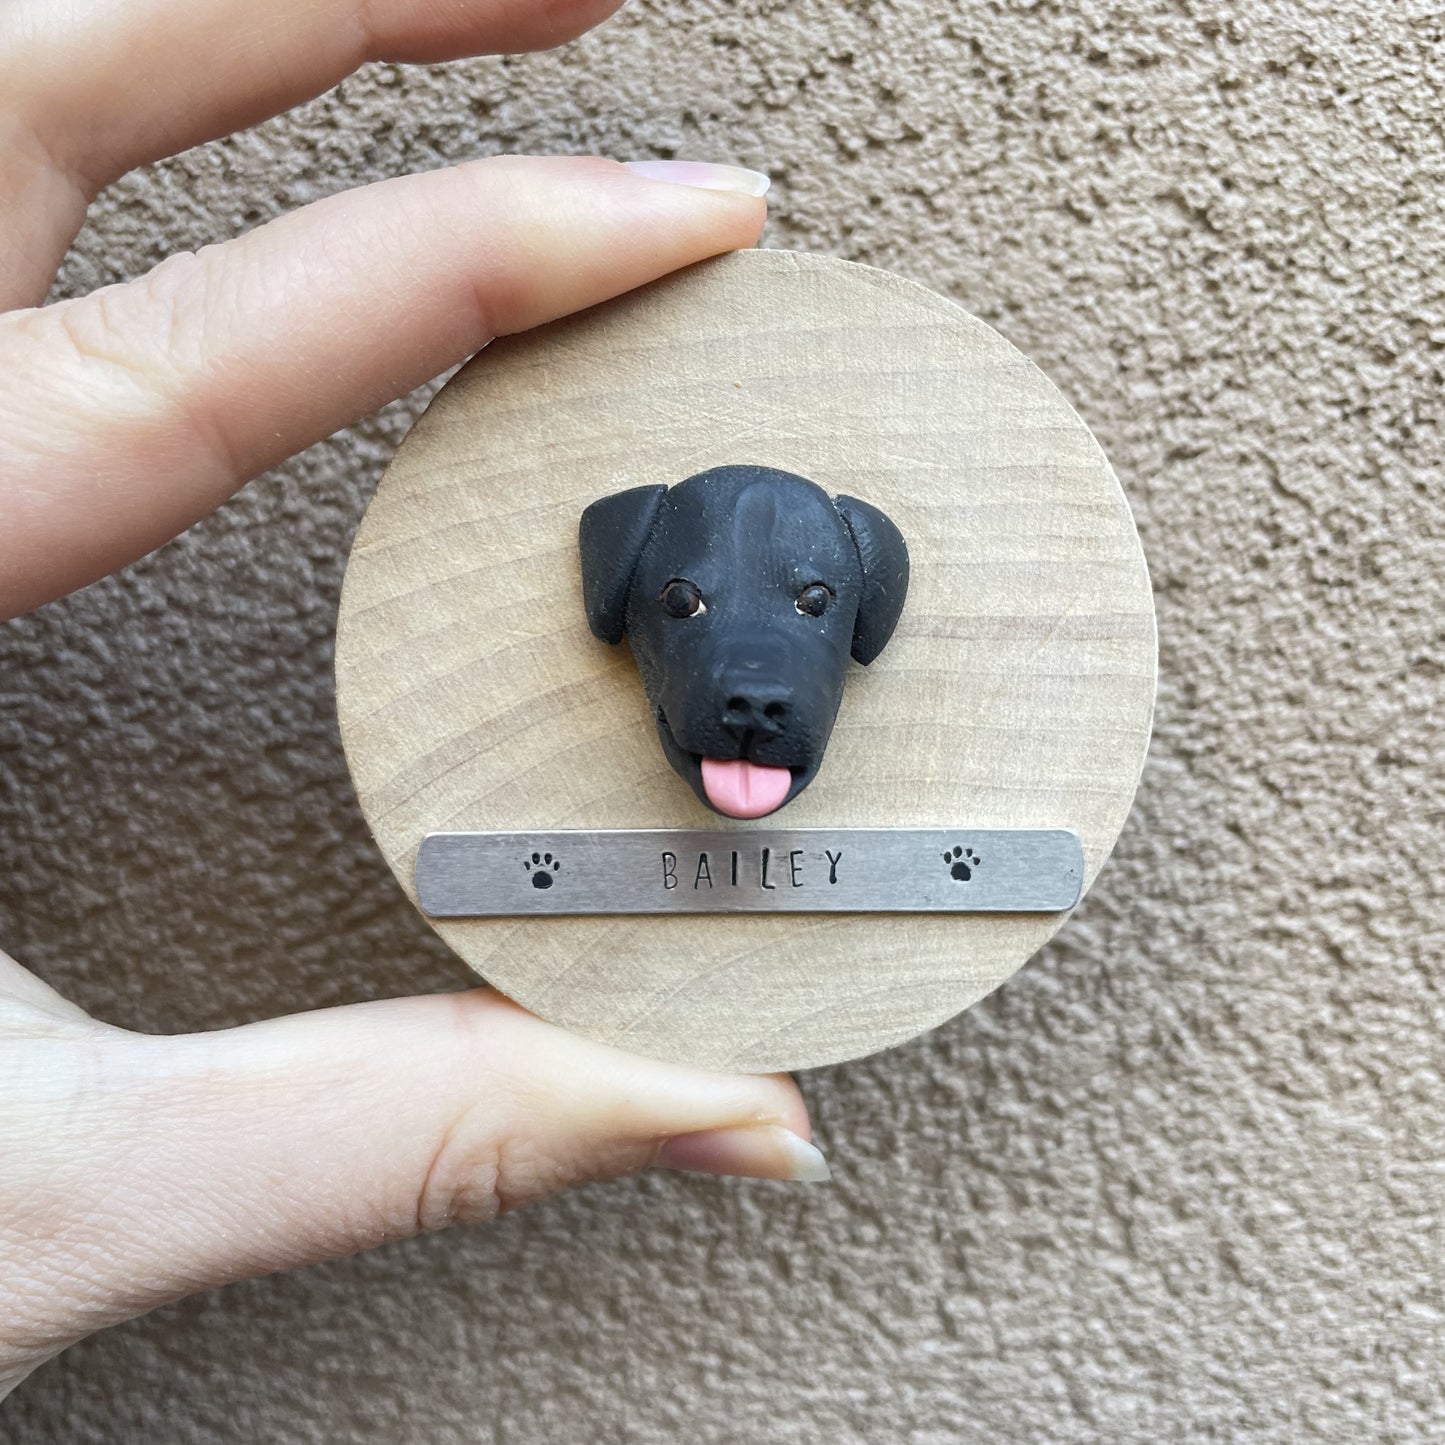 Handmade custom timber magnetic bottle opener with 3D dog face and name plaque..